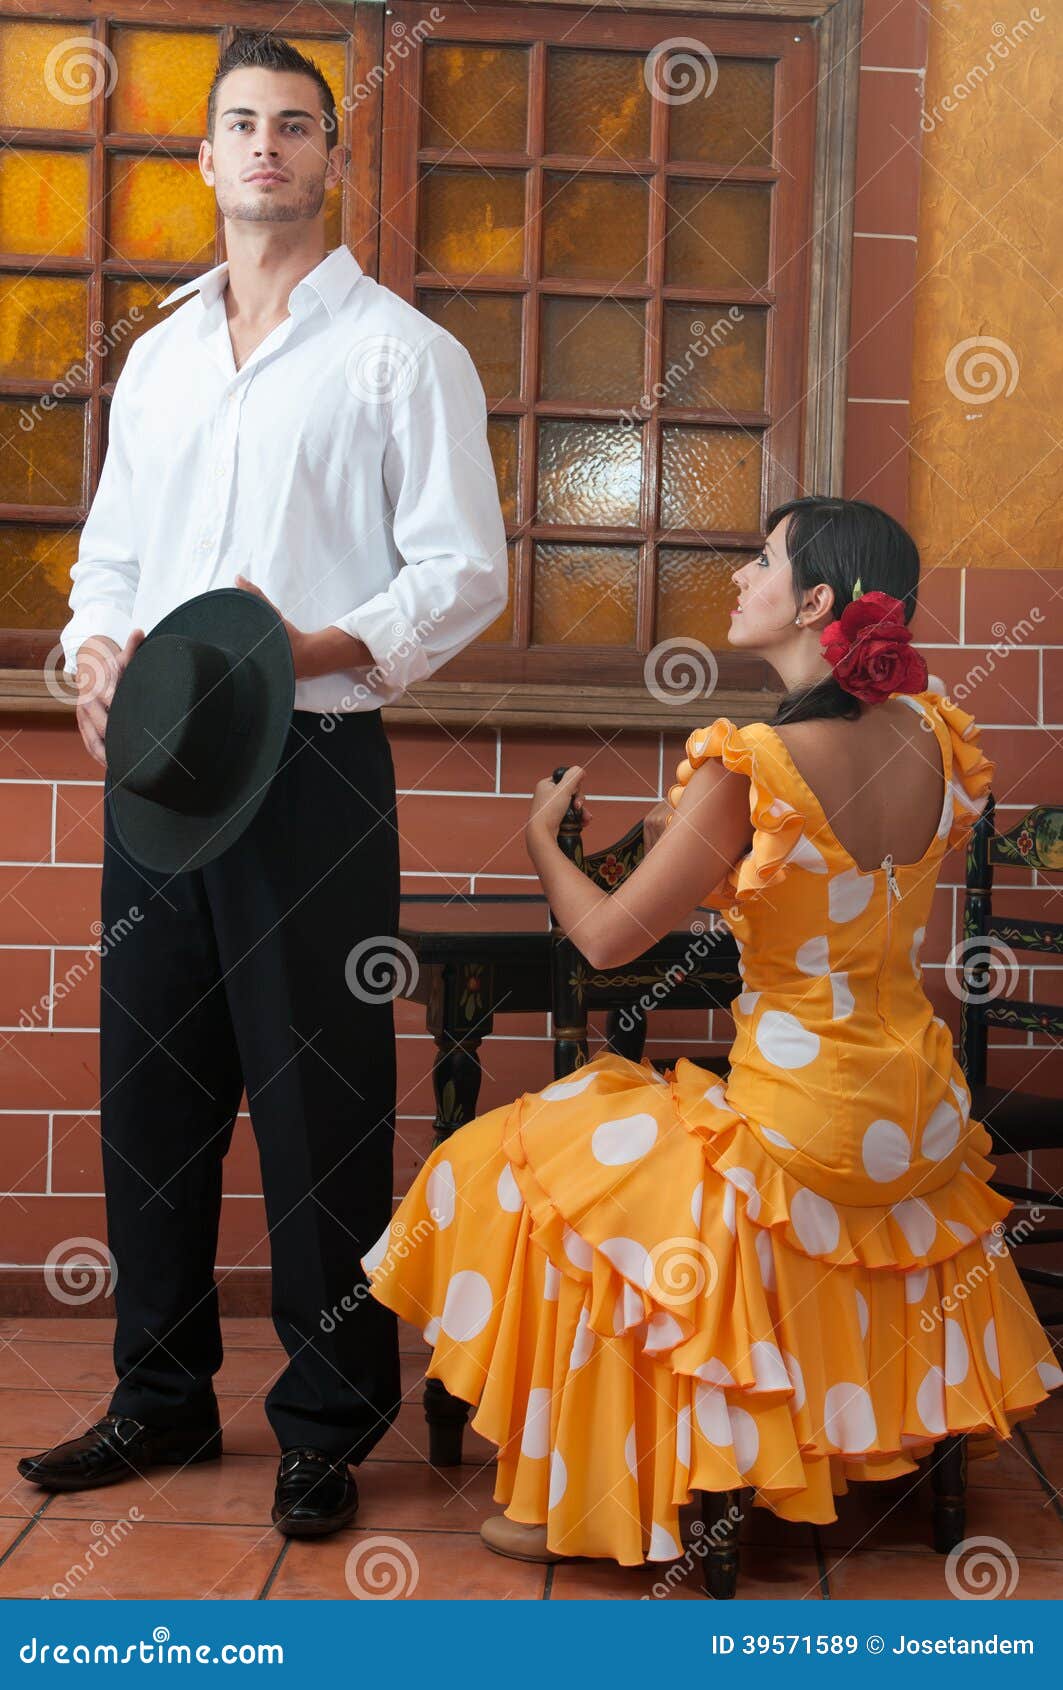 women and man in traditional flamenco dresses dance during the feria de abril on april spain